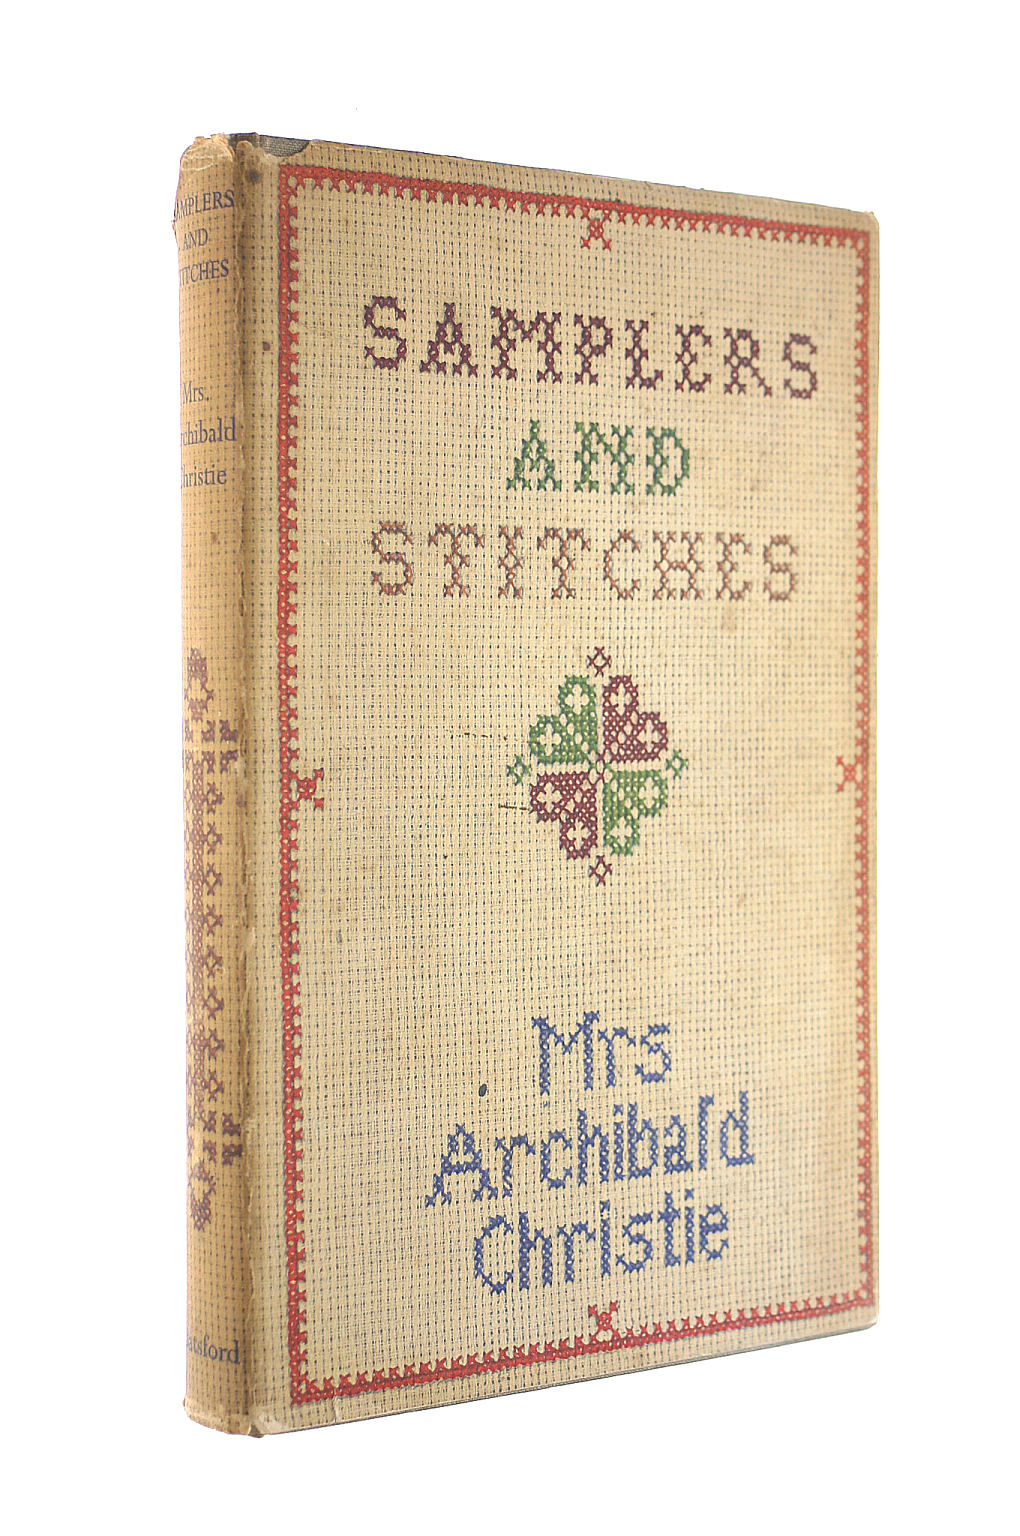 MRS ARCHIBALD CHRISTIE - Samplers and Stitches : a handbook of the embroiderer's Art